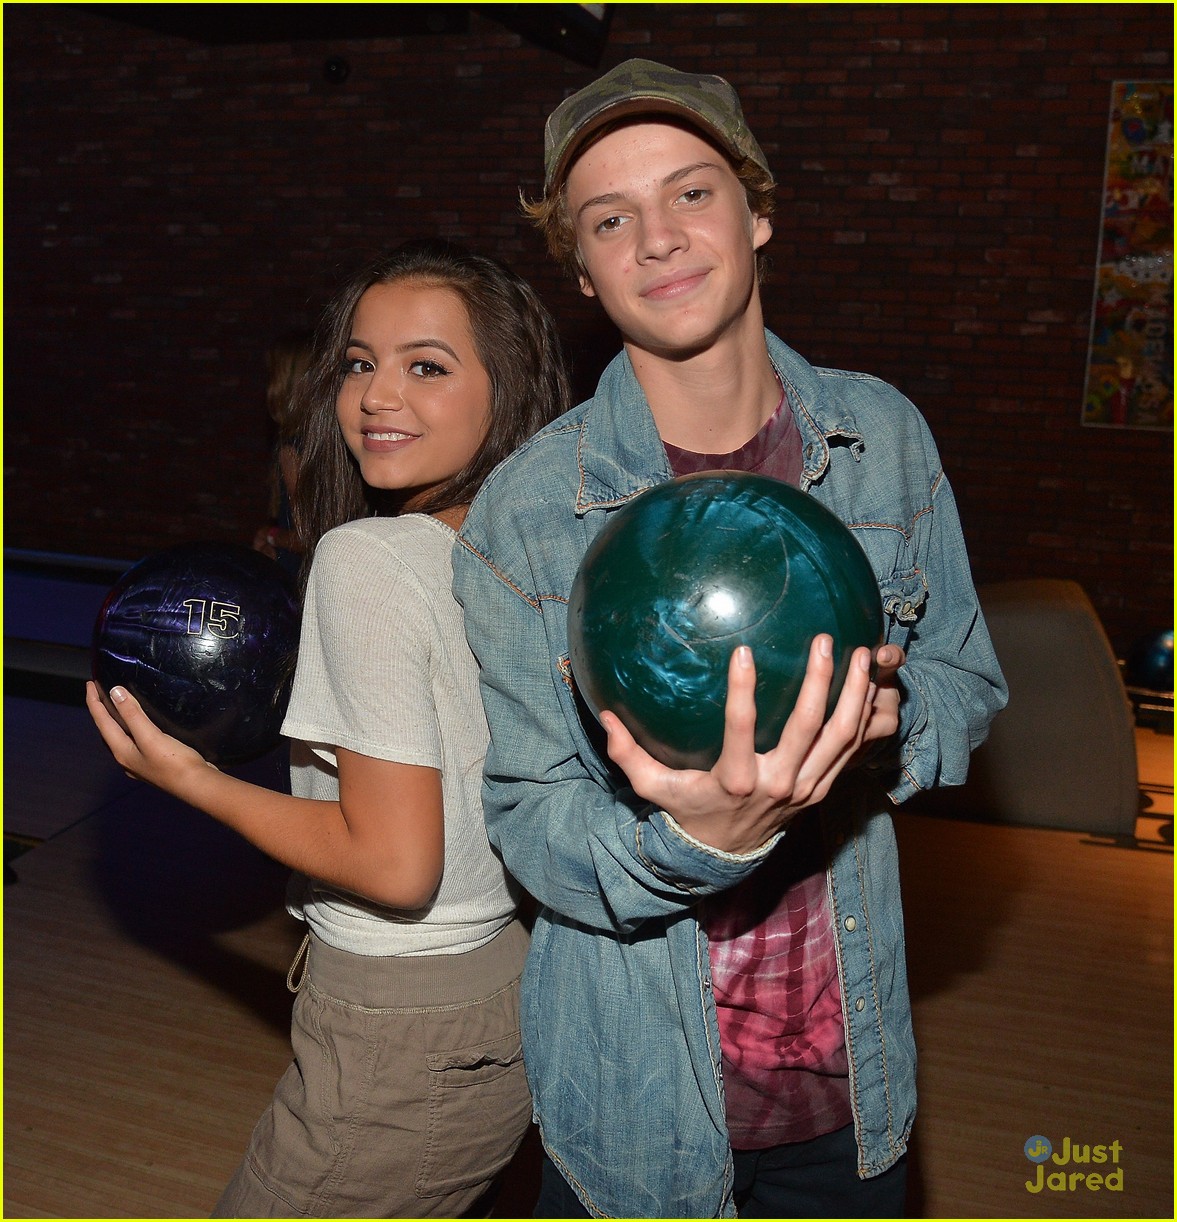 breanna yde 13th party pics lvlten mag quote 21